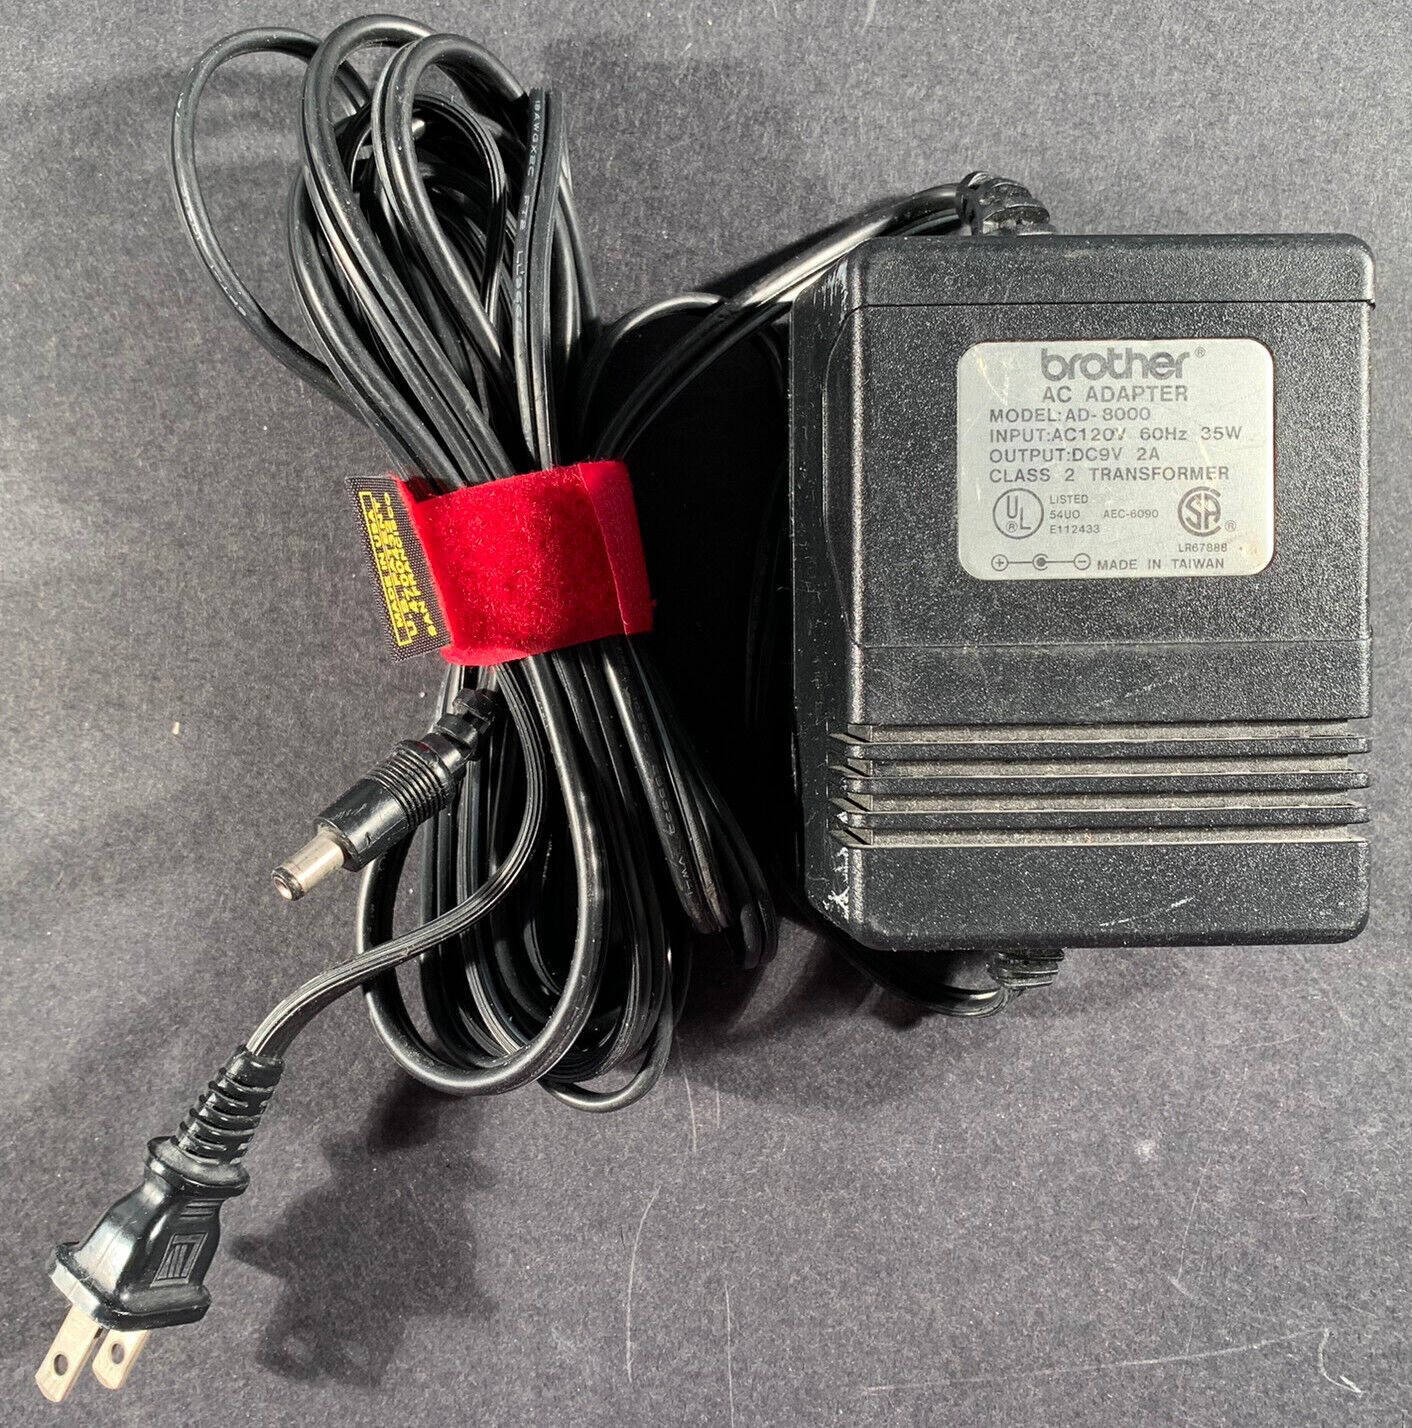 *Brand NEW* Brother AD-8000 9V 2A 35W AC DC ADAPTE POWER SUPPLY